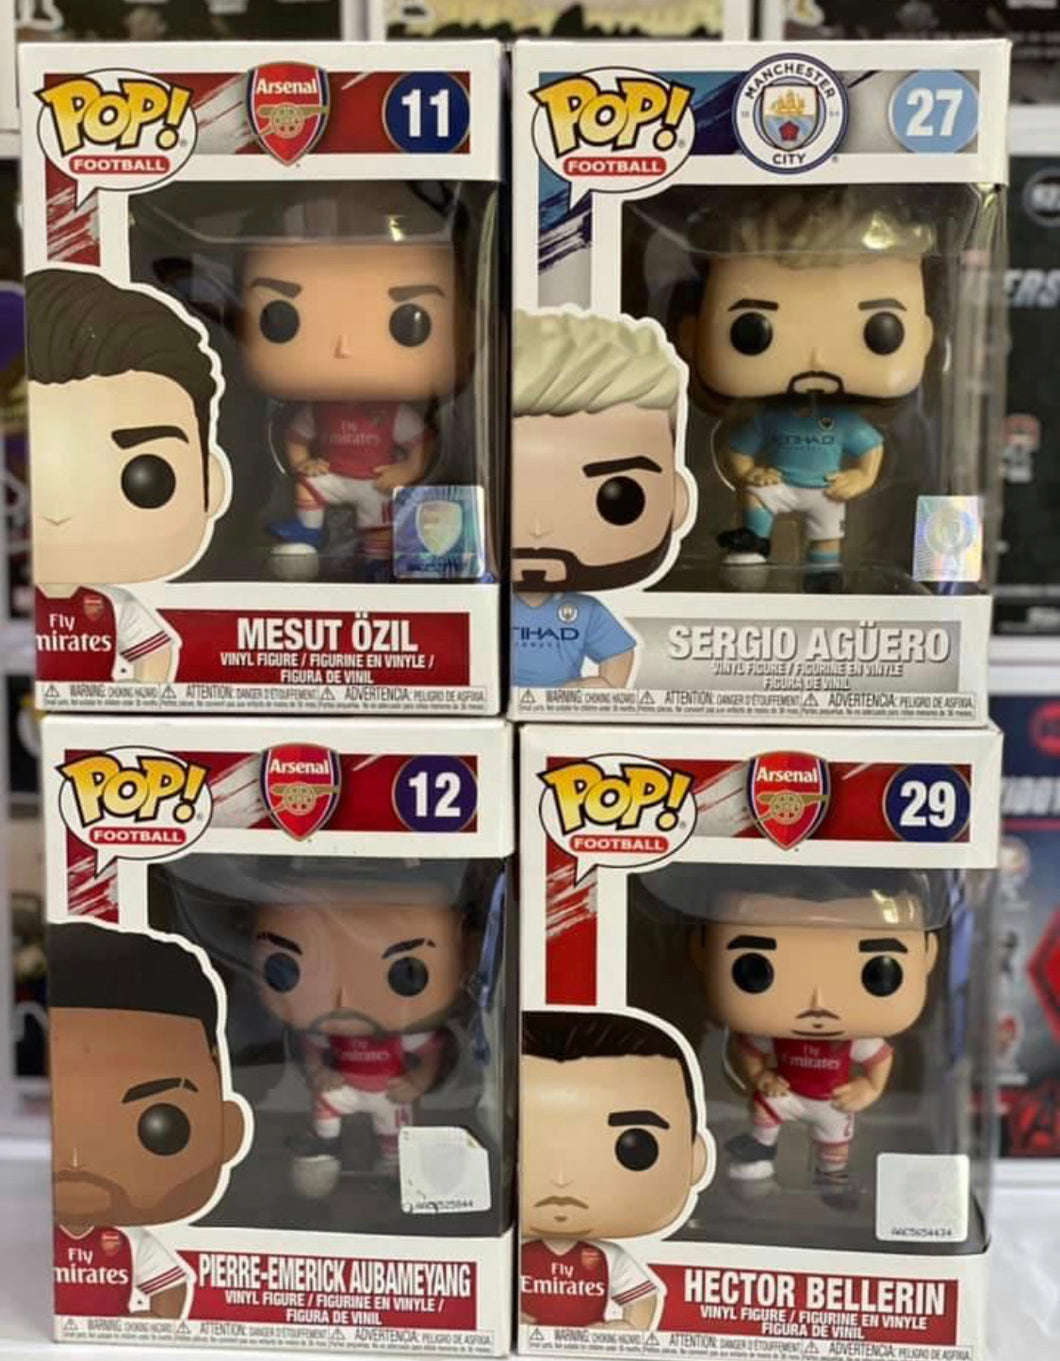 x 4 Football Funko POPS! (Box Damage on Aguero and Aubameyang) Auction (Reserved for Auction Winner)